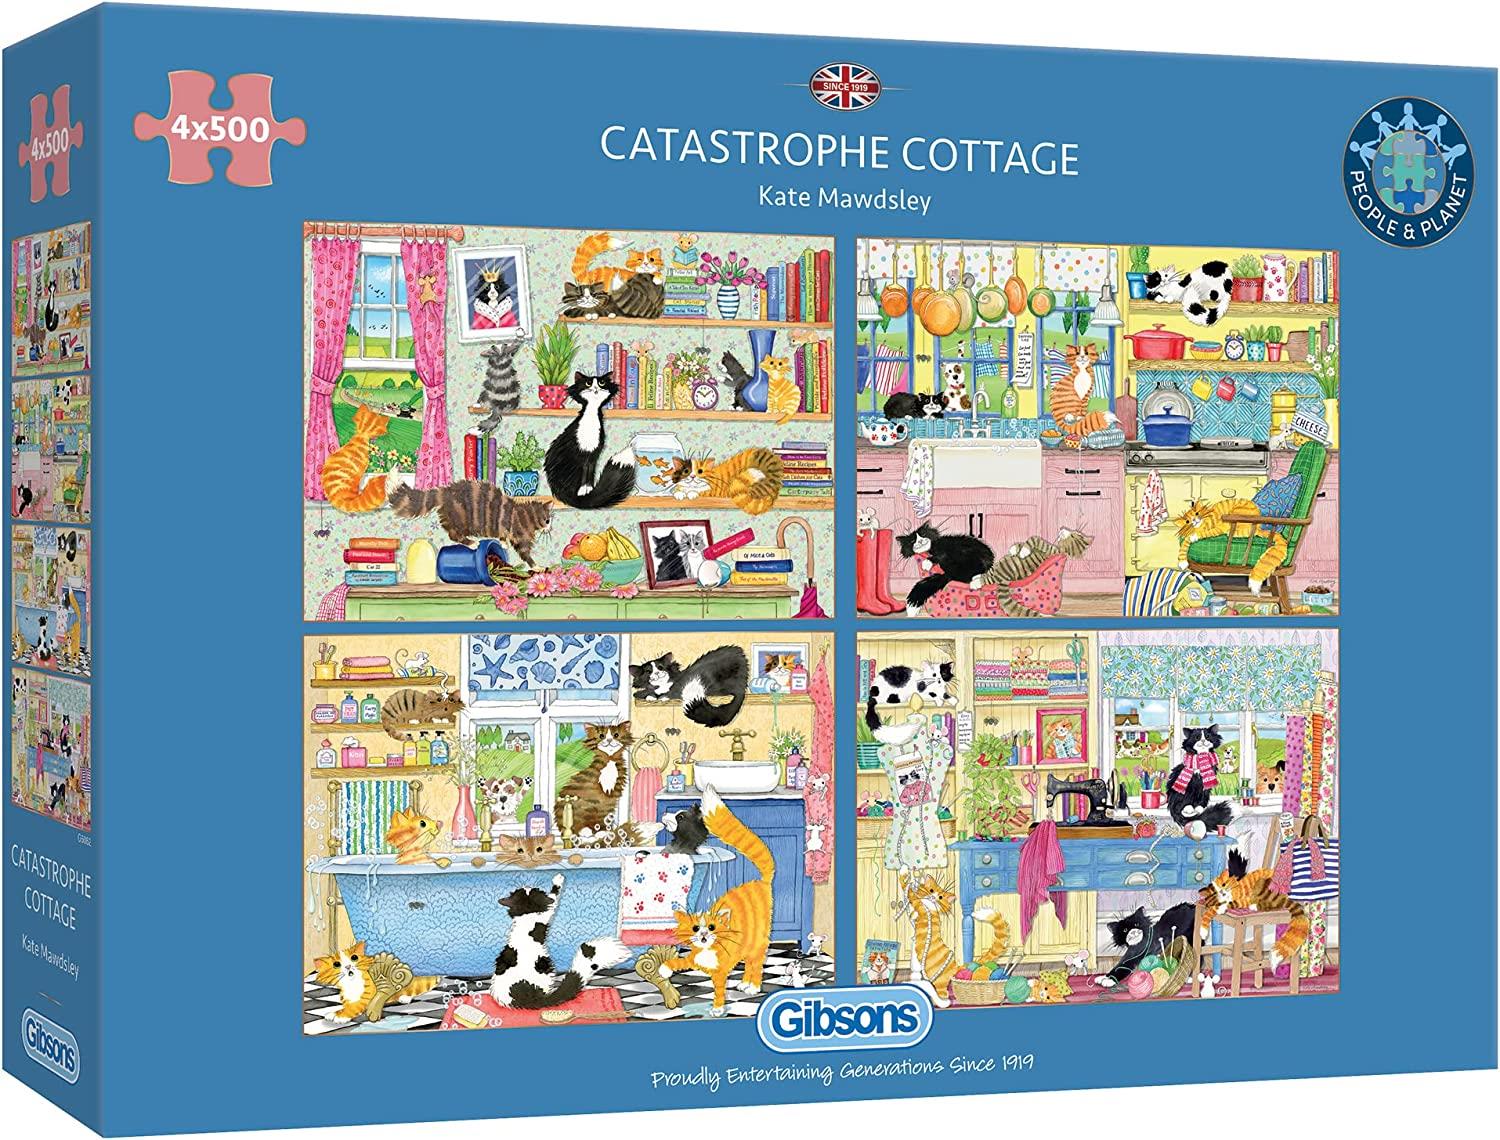 Gibsons Catastrophe Cottage Jigsaw Puzzles (4 x 500 Pieces)